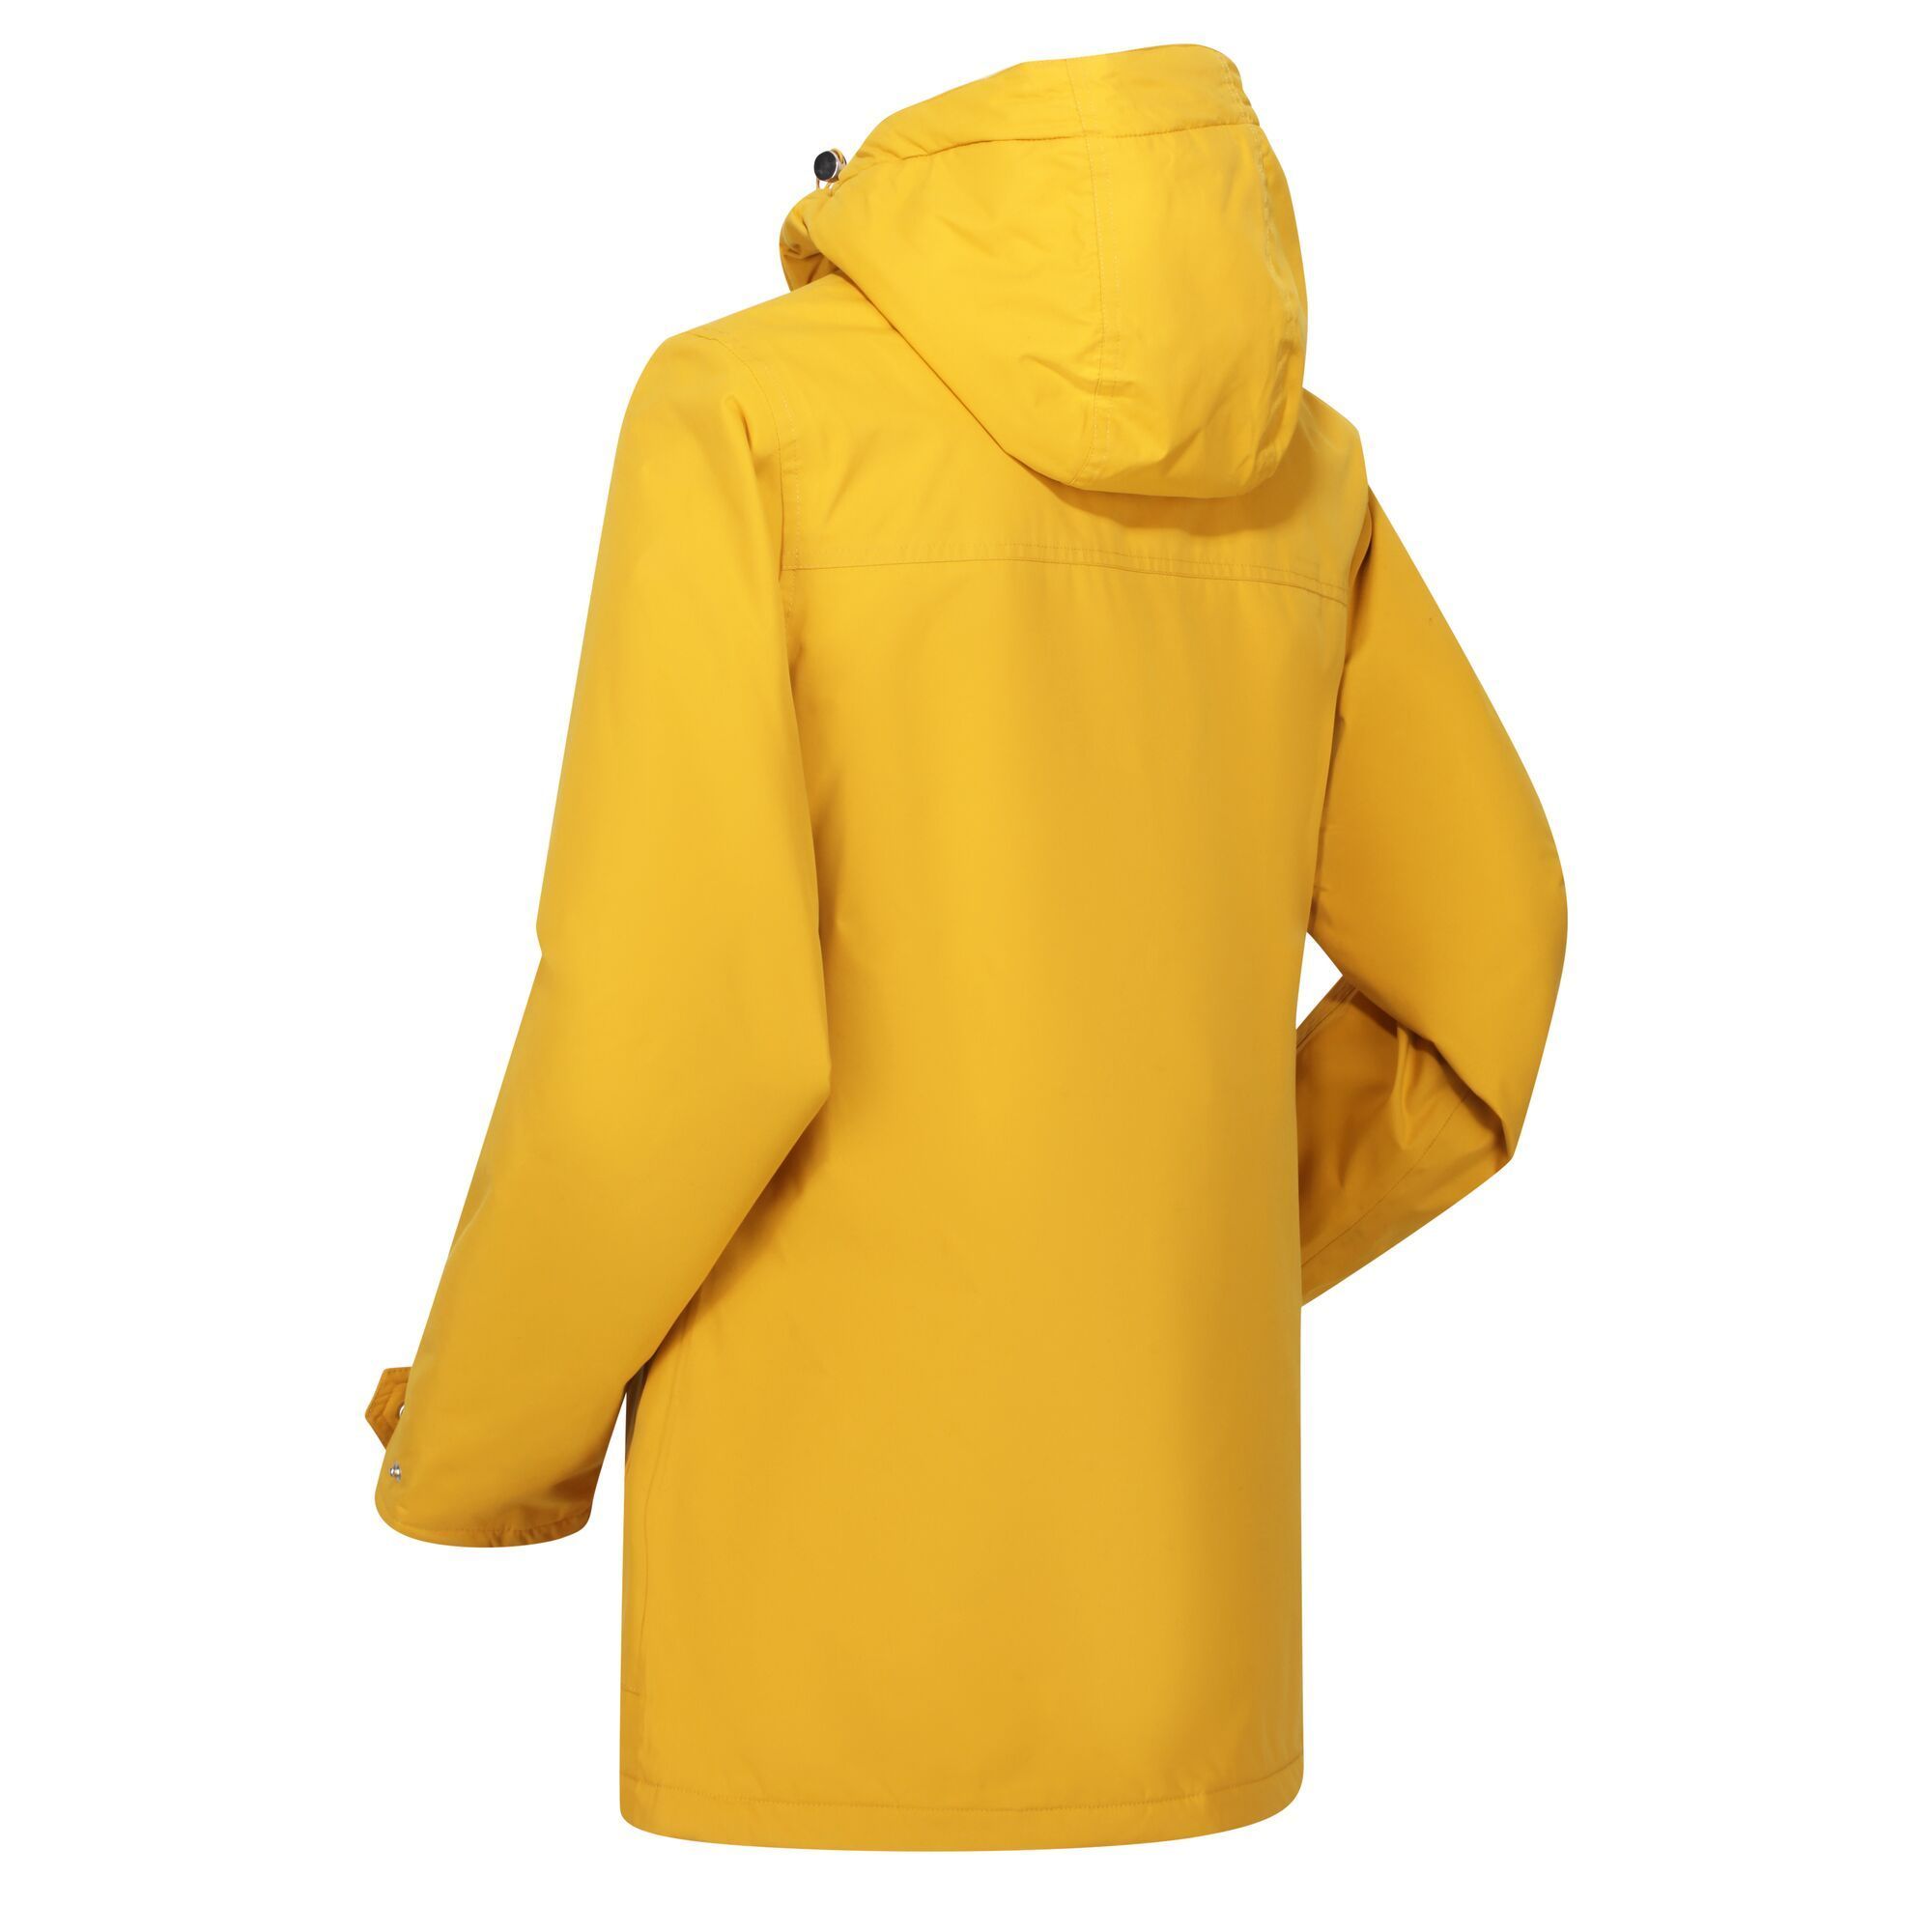 Material: 100% Polyester. Fabric: Faux Fur, Hydrafort. Design: Plain. Fit: Regular. Fabric Technology: Durable. Hooded, Insulated, Side Seams, Taped seam, Thermo-Guard, Waterproof. Cuff: Adjustable. Neckline: Hooded. Sleeve-Type: Long-Sleeved. Hood Features: Adjustable, Grown On Hood. Length: Regular. Pockets: 2 Front Pockets, 1 Security Pocket. Fastening: Full Zip.